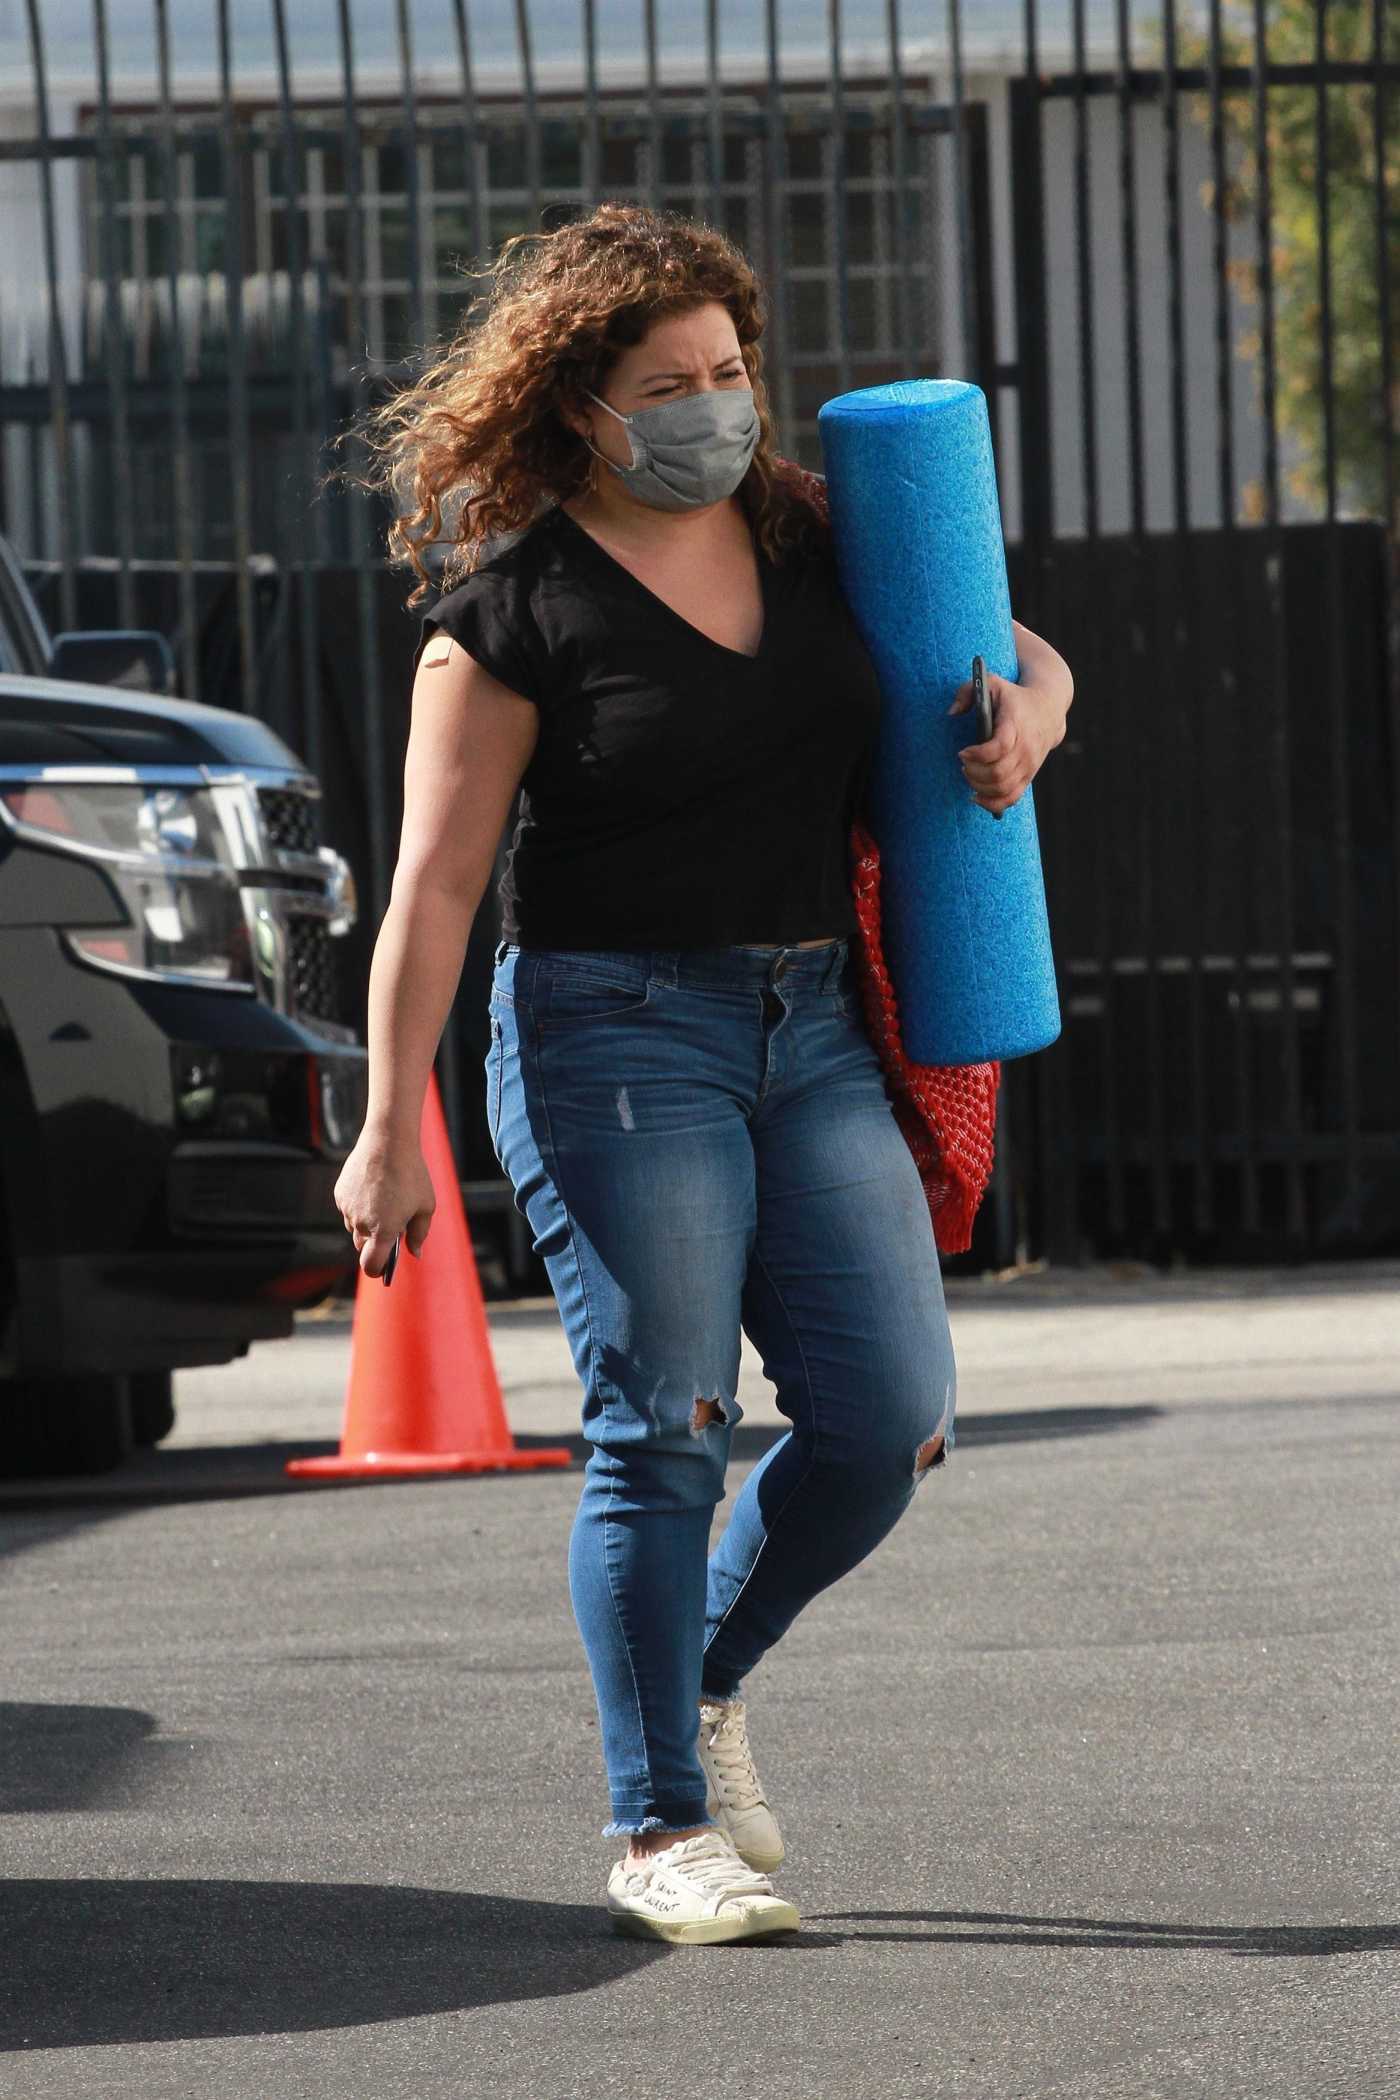 Justina Machado in a Blue Ripped Jeans Arrives at the DWTS Studio in Los Angeles 11/06/2020